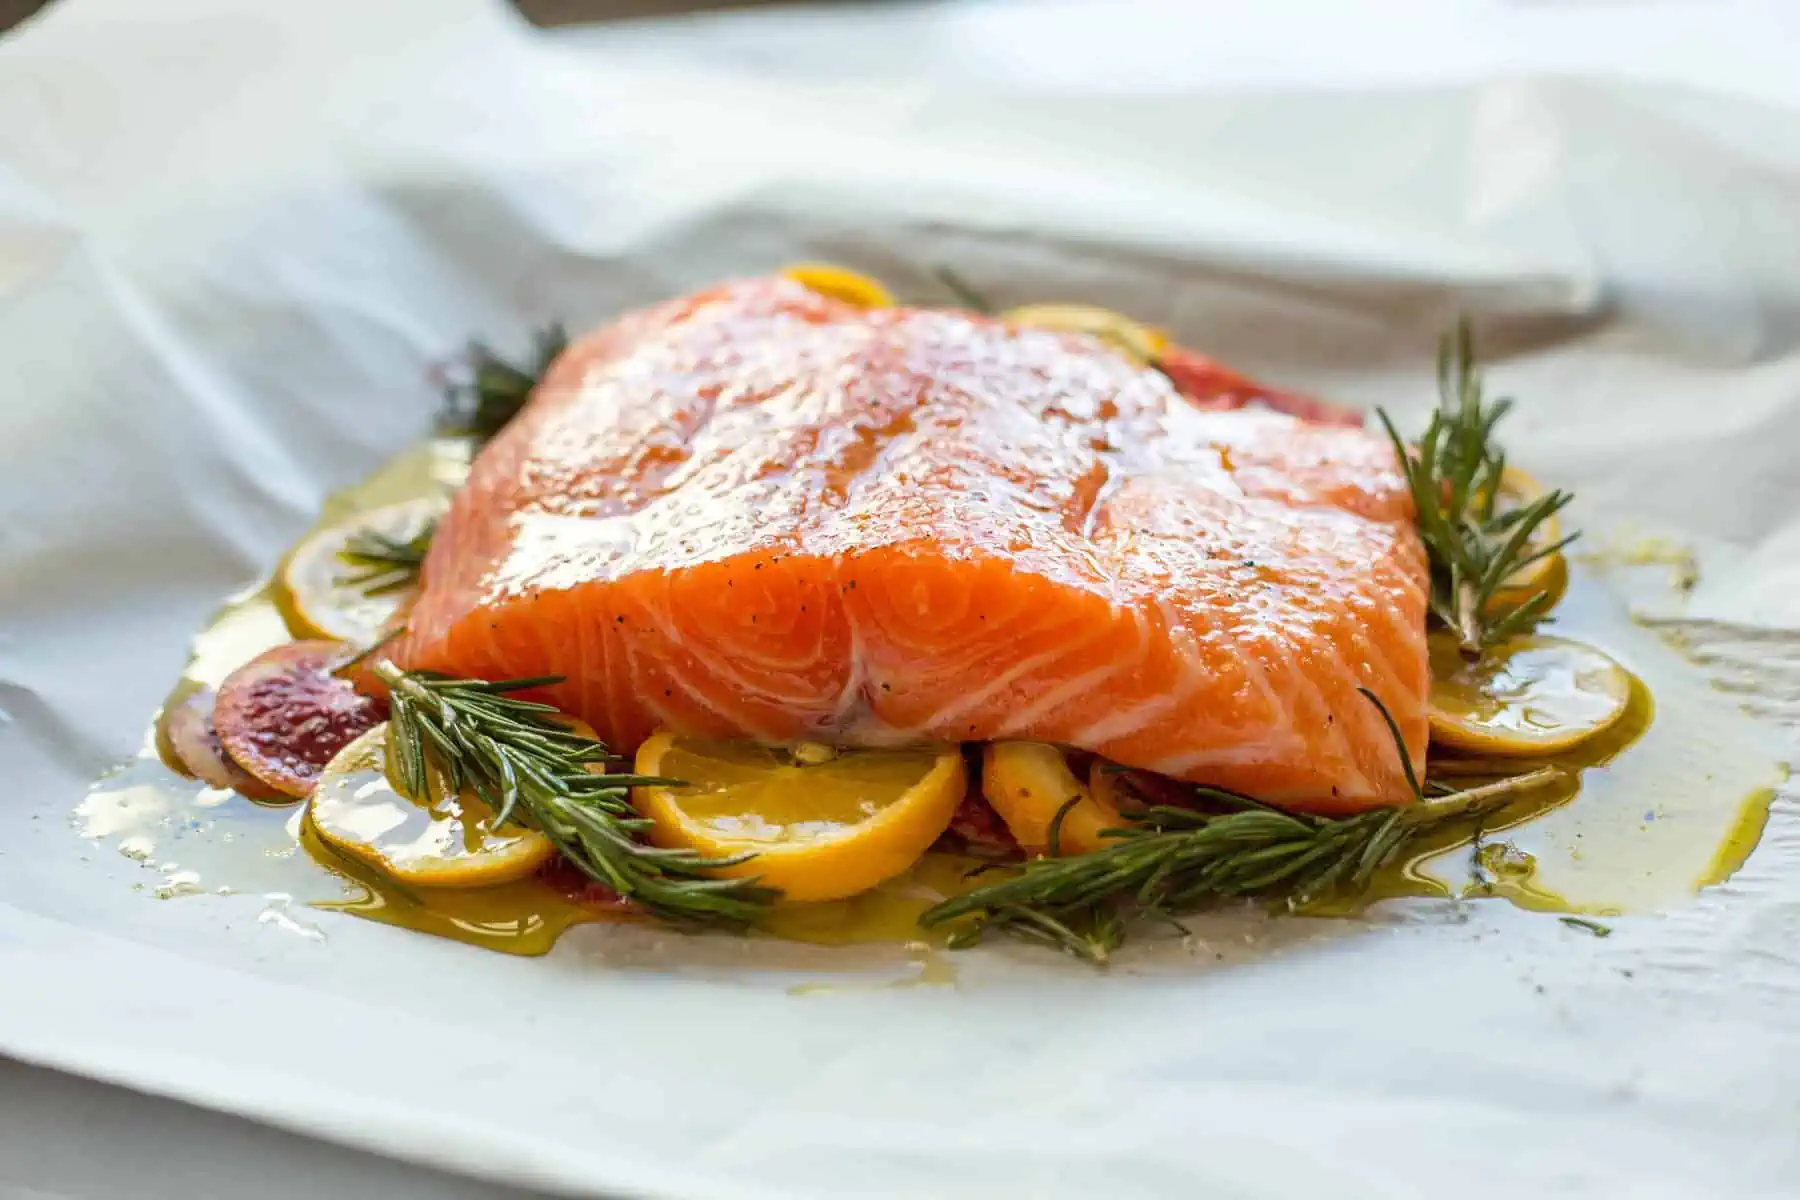 A salmon fillet on a bed of citrus and herbs ready to be wrapped in a parchment pocket.